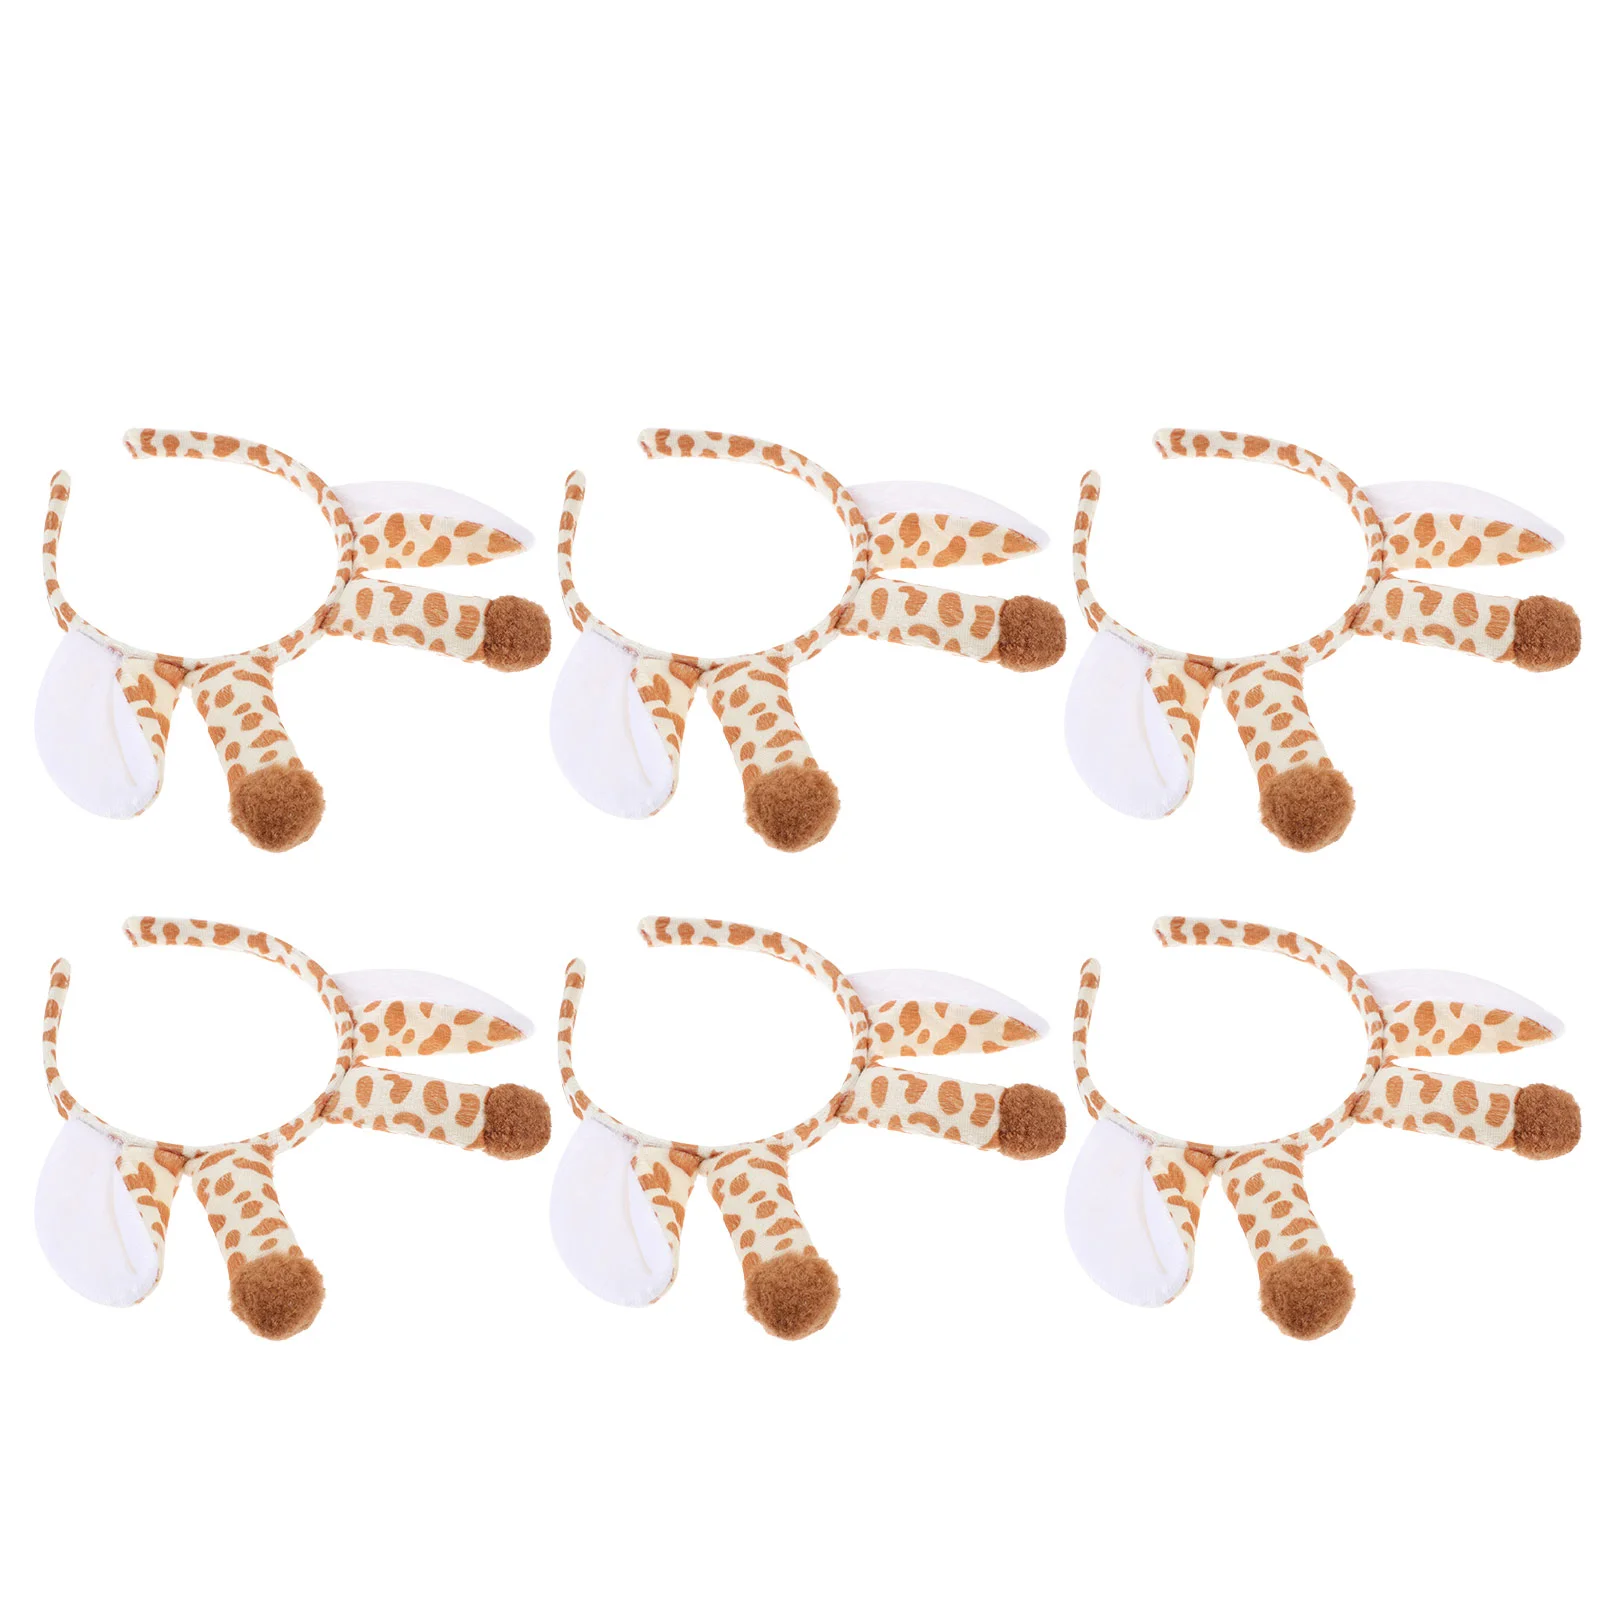 6 Pcs Animal Headband Lovely Hair Wear Decorate Christmas Party Hoops Accessories Girls Headdress Cloth for Kids Miss sexy crop tops for women strapless backless big bow decorate zipper closure elegant evening birthday party events blouse shirts